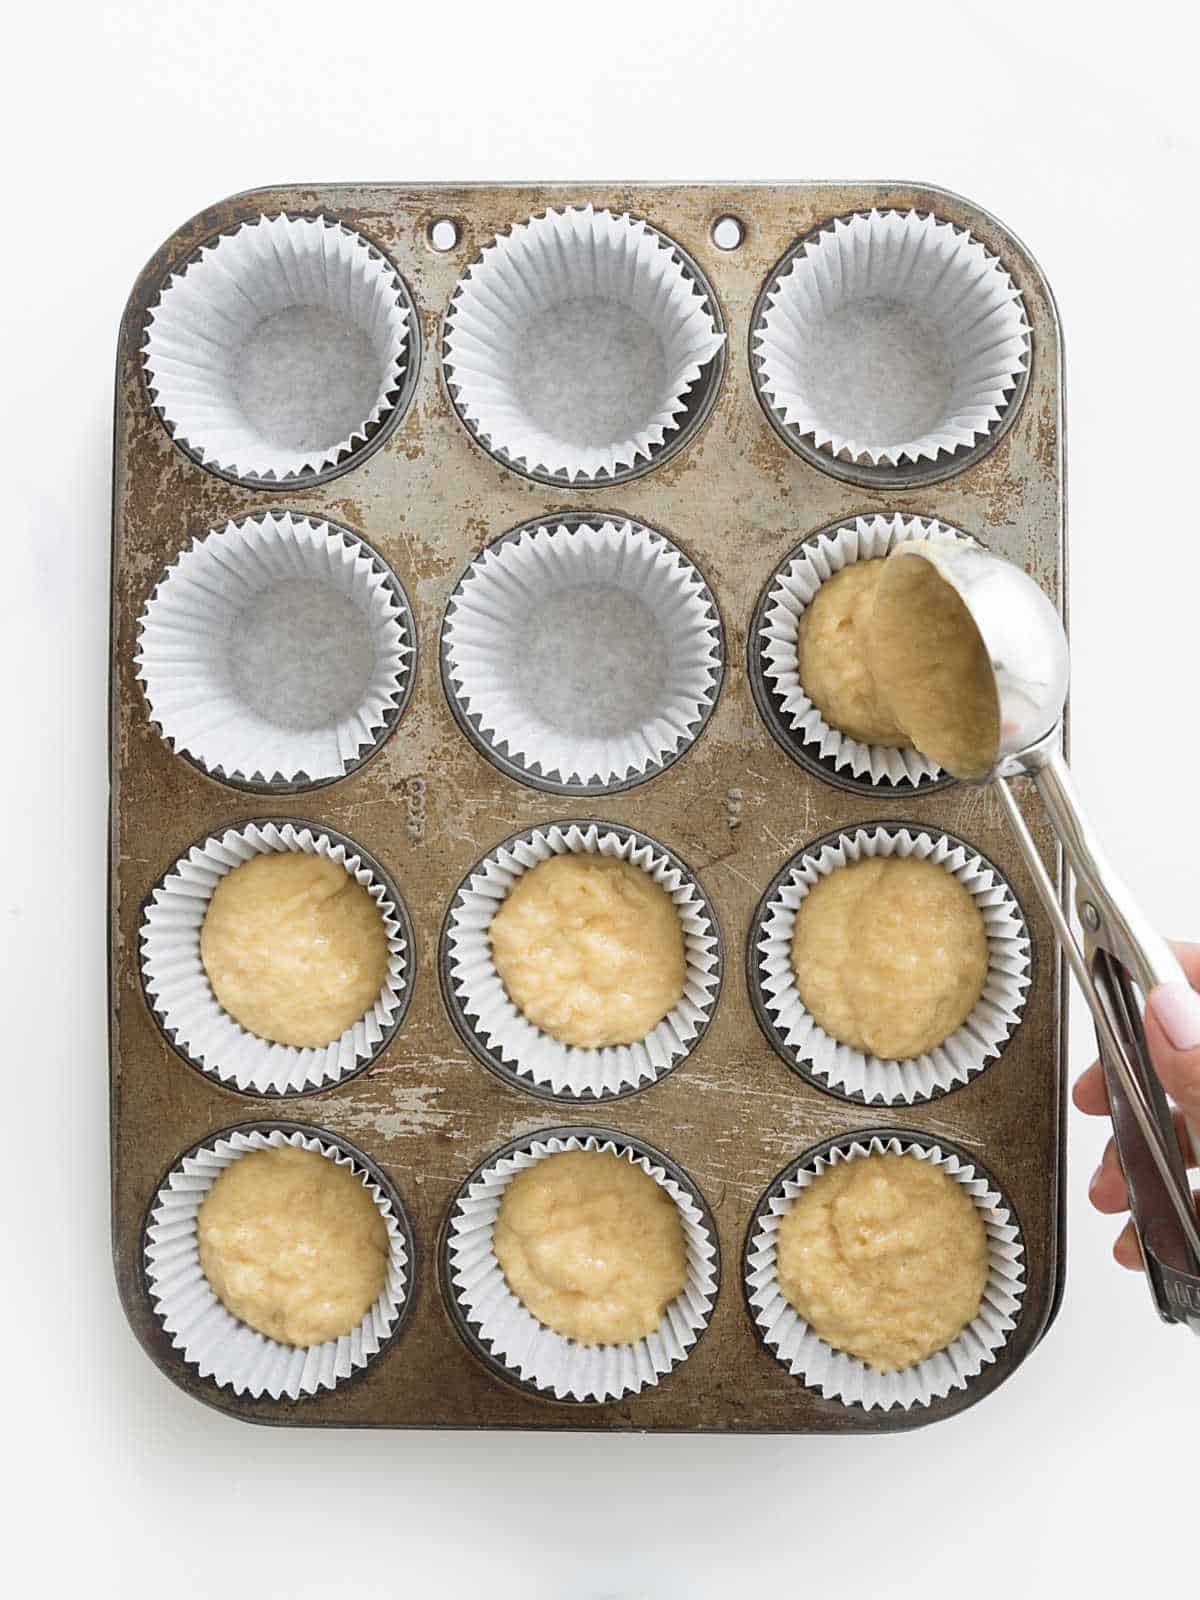 Scooping muffin batter into white paper liners on a metal muffin pan. White surface.